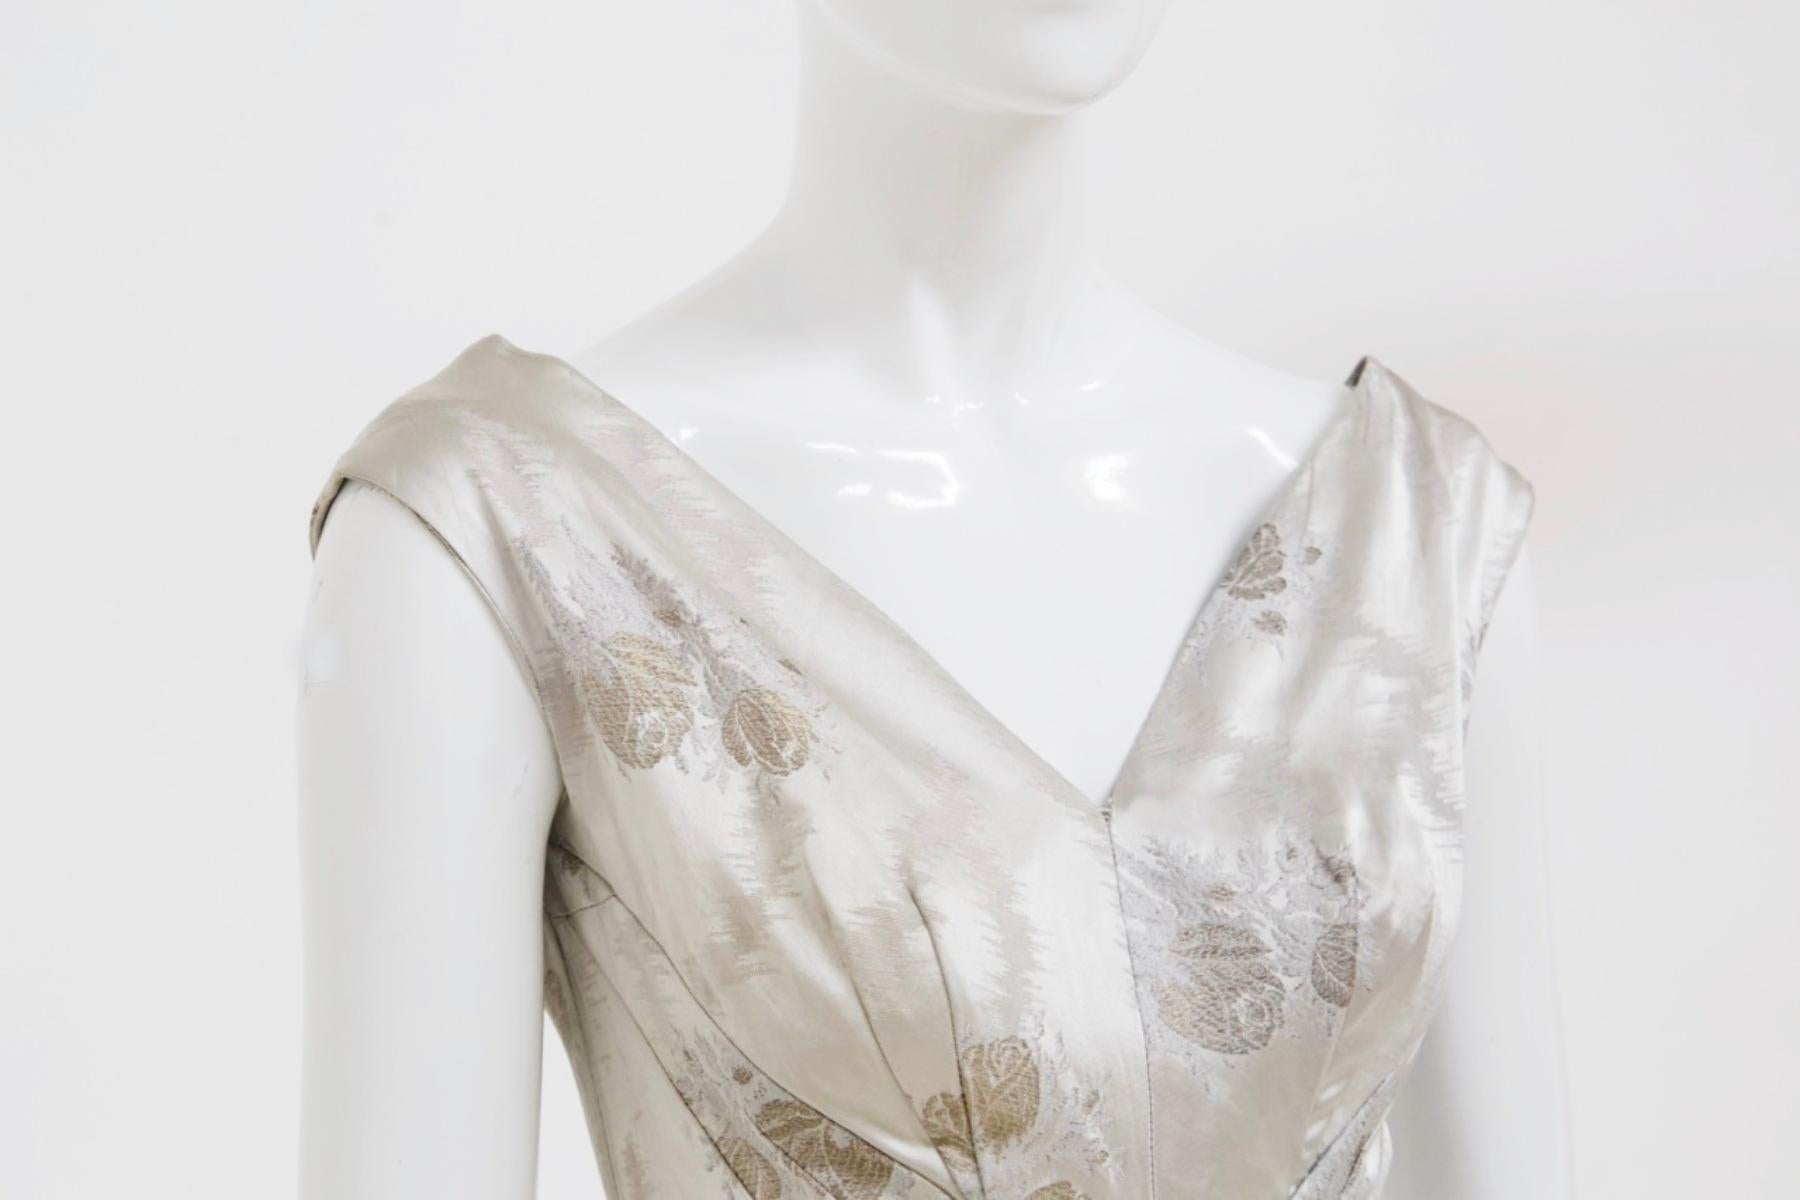 Sumptuous vintage sartorial dress designed in the 1950s, fine Italian craftsmanship.
The dress is made entirely of pearl gray silk satin, very elegant and delicate.
The straps are thin and stop at the shoulder, giving prominence to the chest and its